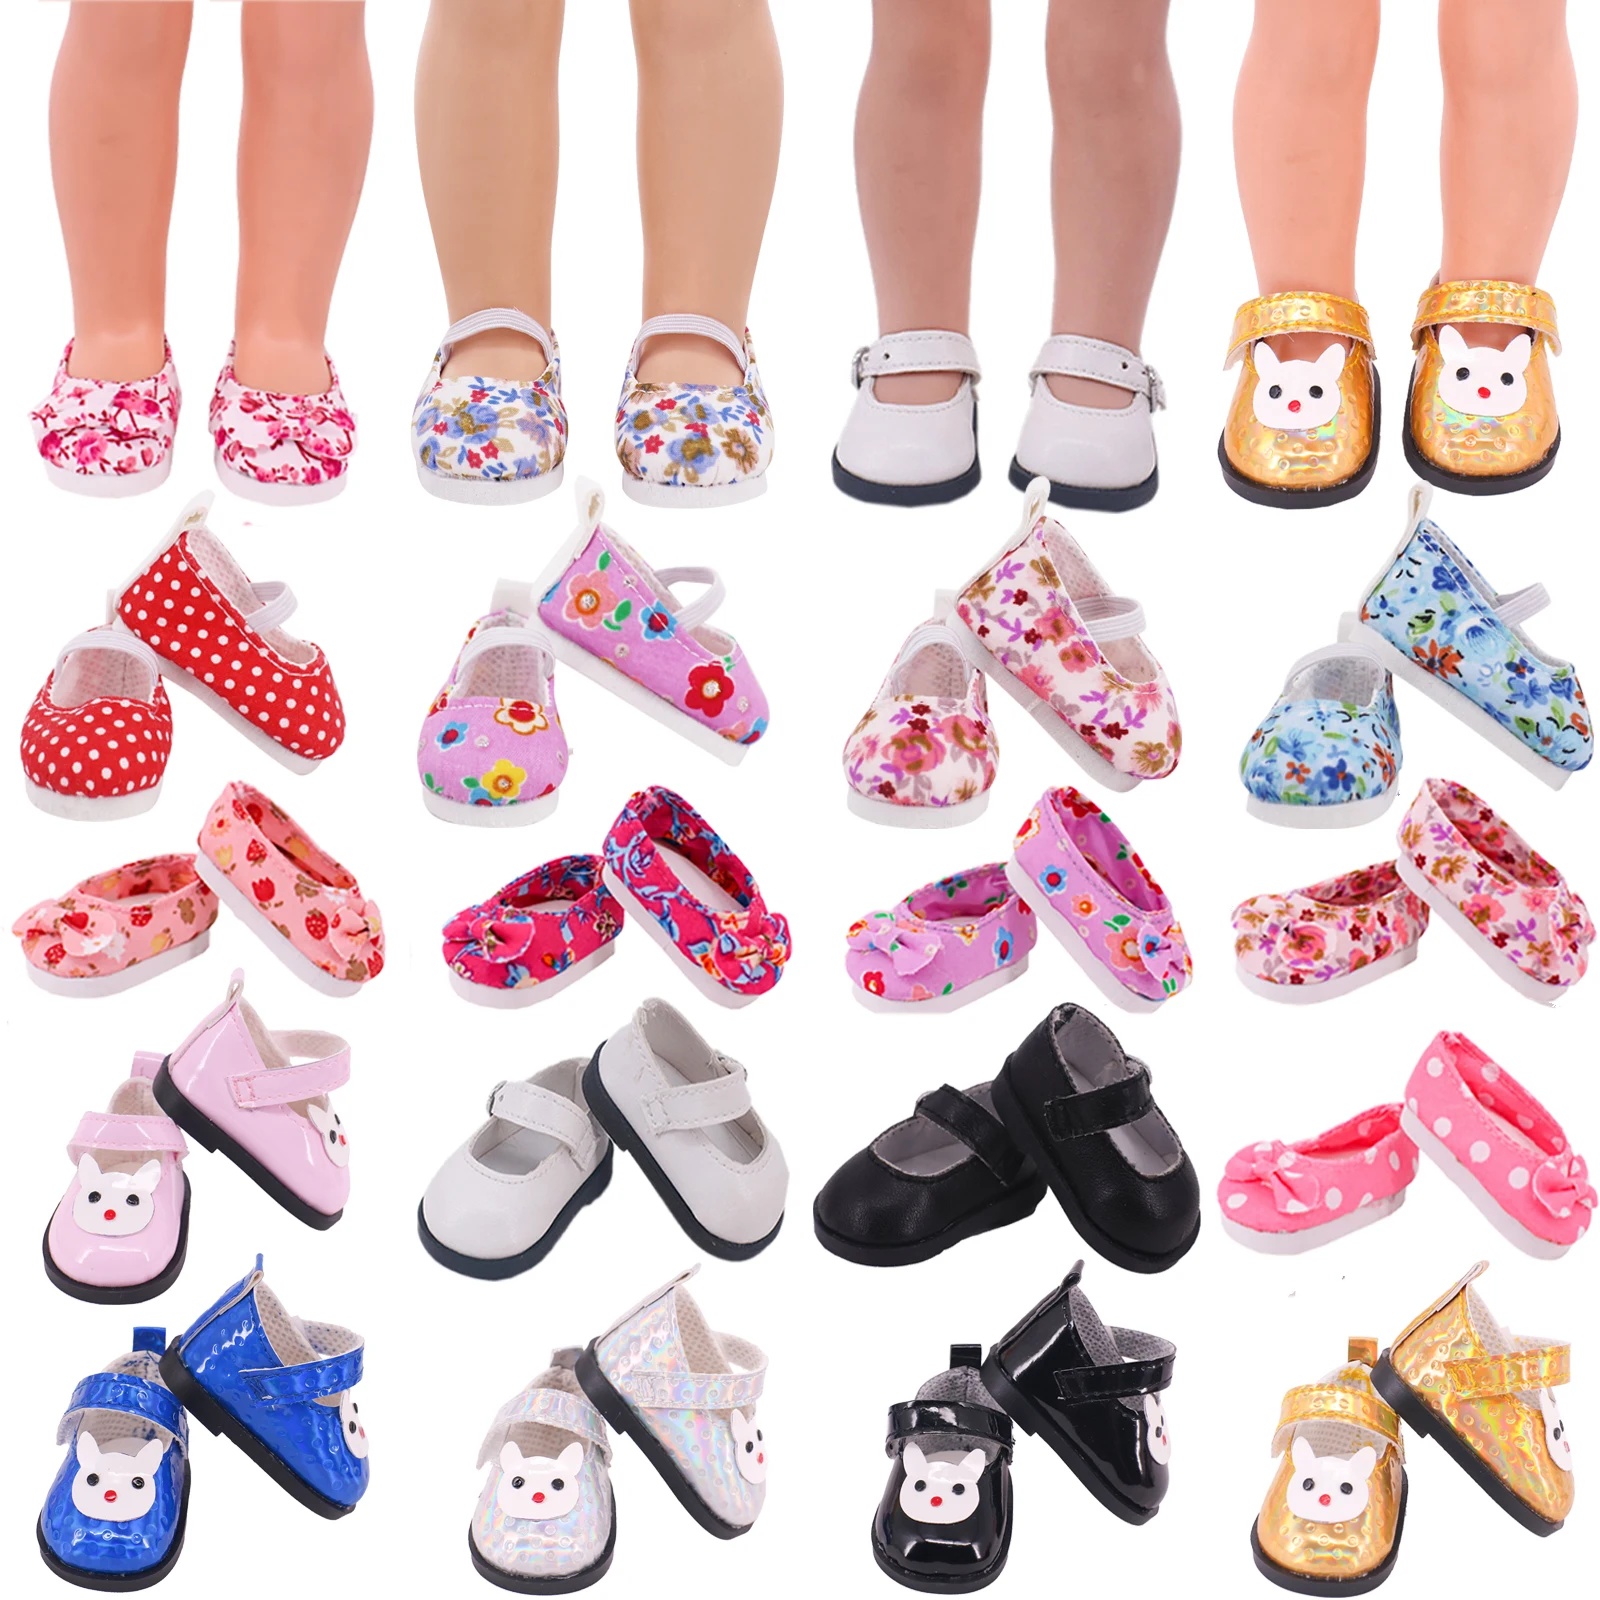 Cute 5Cm Doll Shoes Paola Reina Wellie Wisher Floral&Pu Shoes For 14.5 Inch Doll&EXO&Blythe Doll Accessories Girl DIY Toys la reina del sur